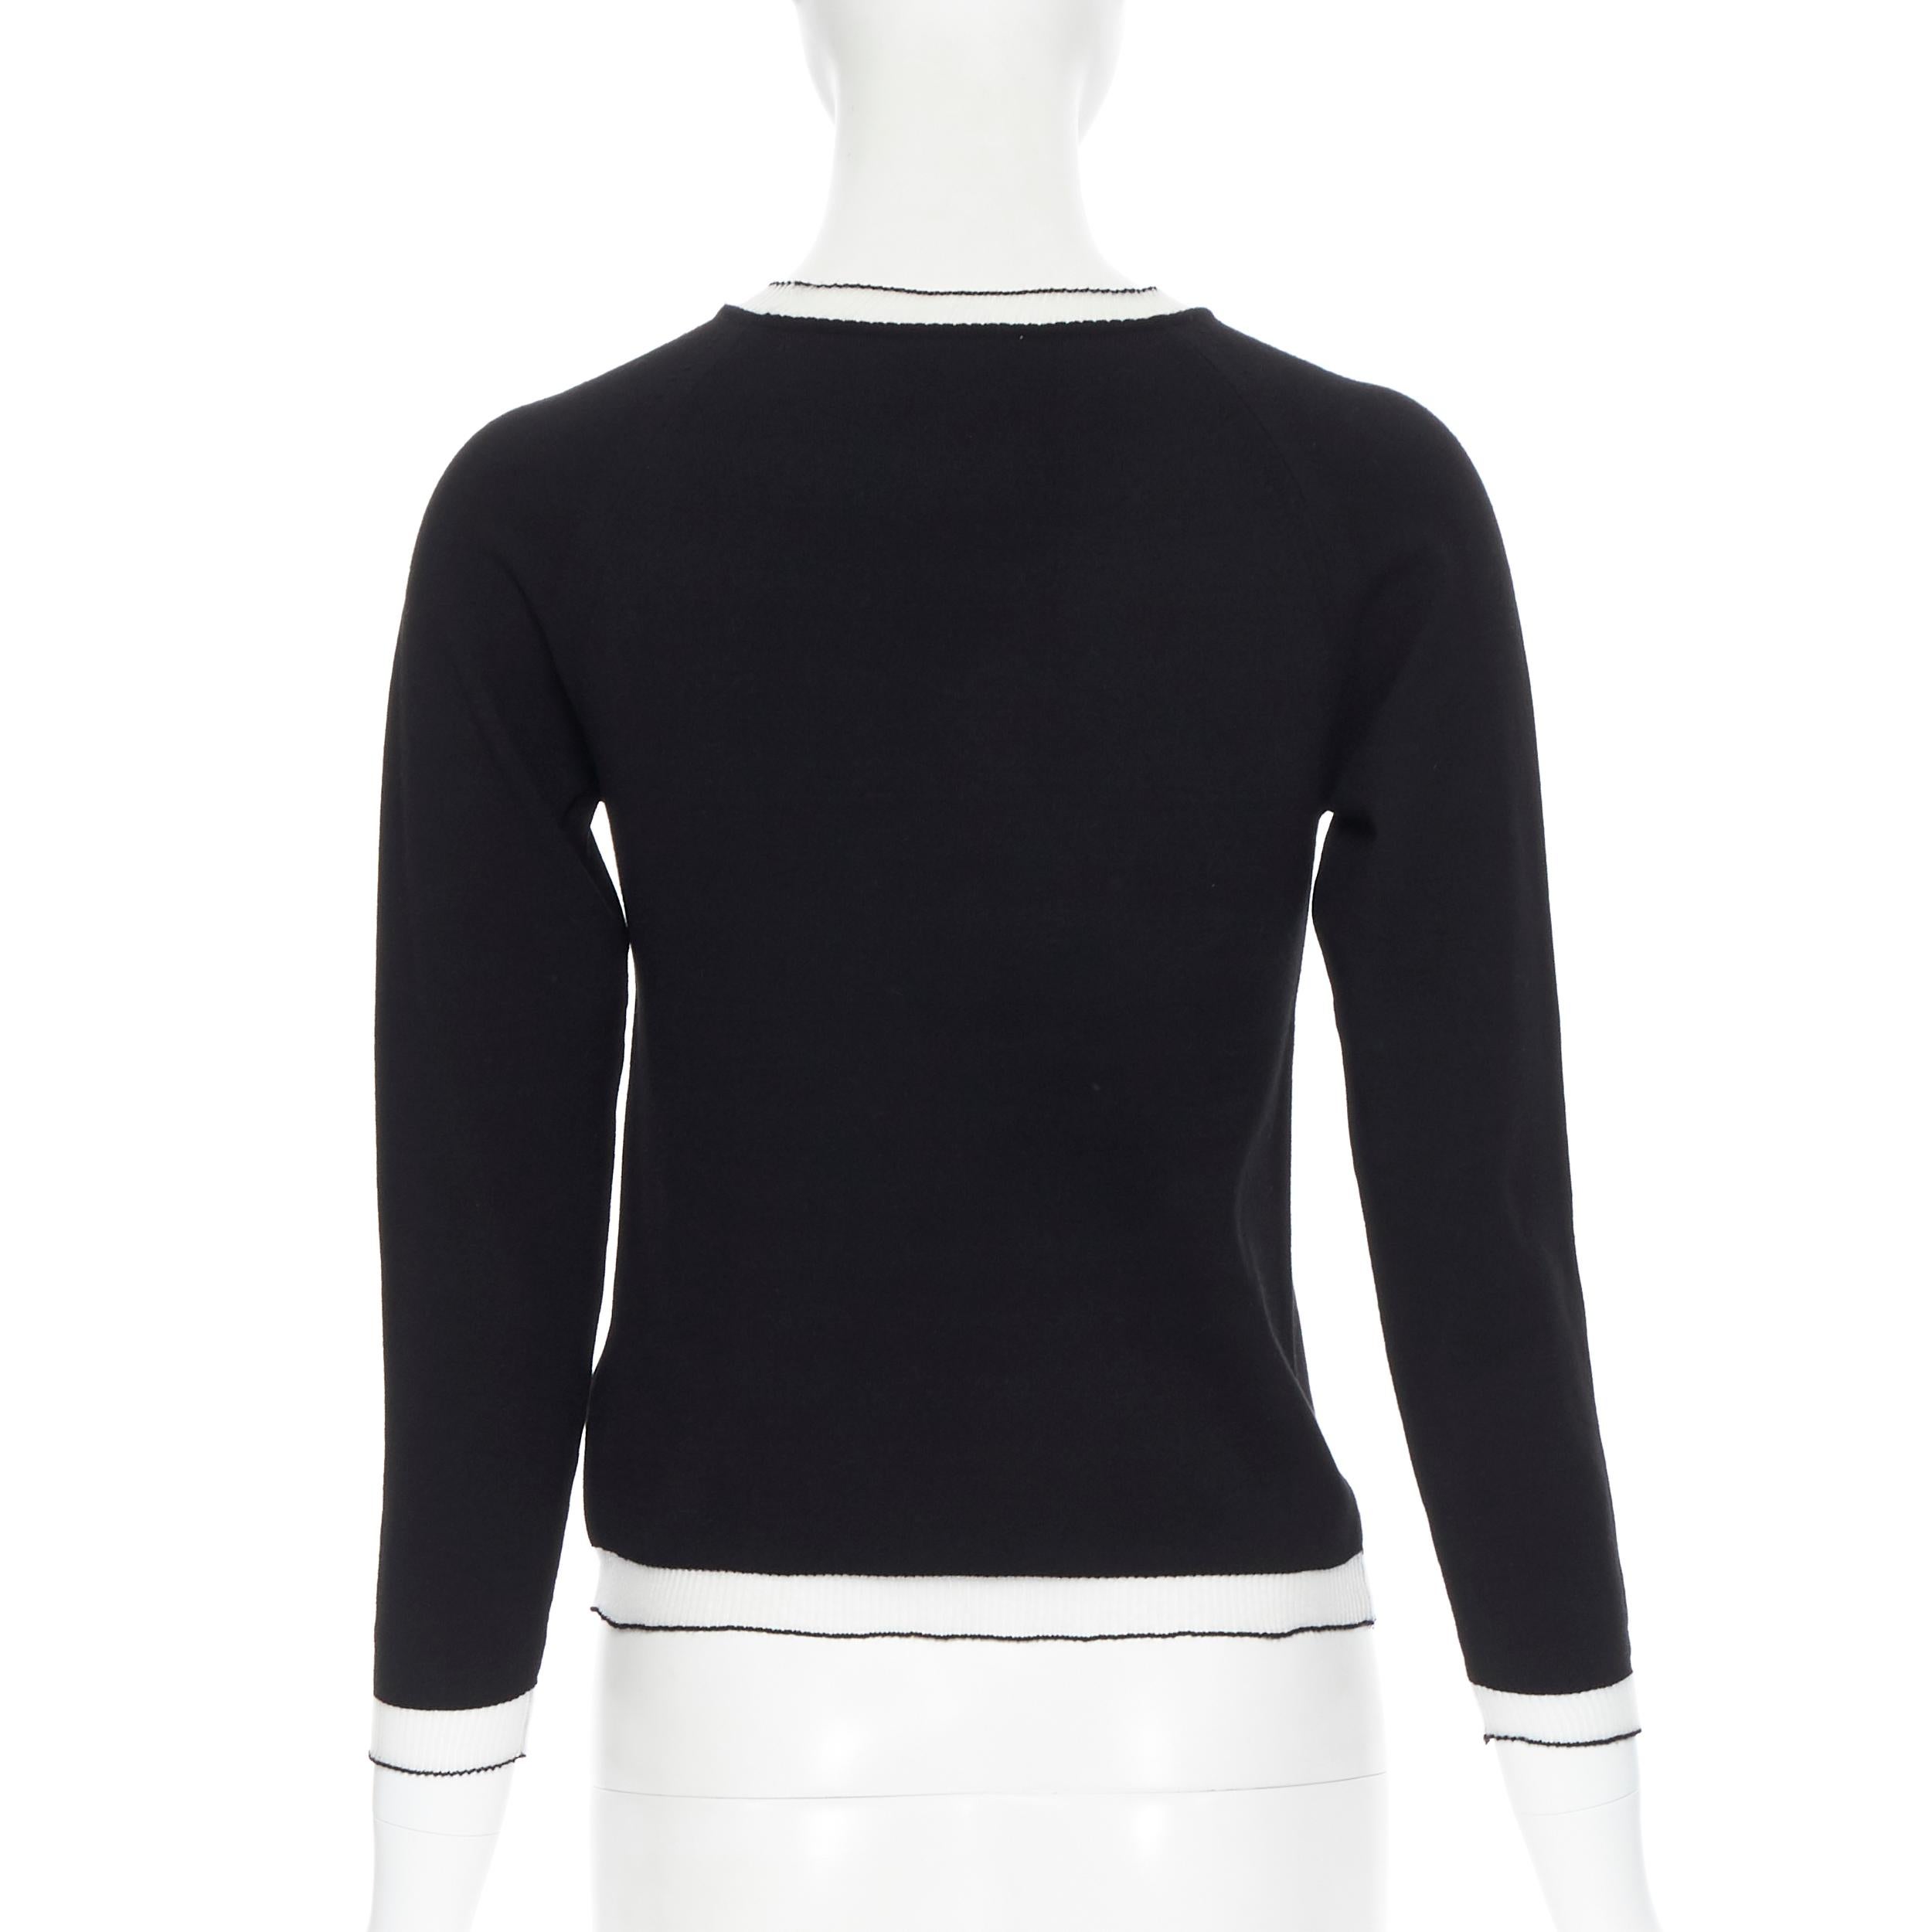 Women's TOMAS MAIER black viscose polyester knit white sheer ribbed sweater top XS